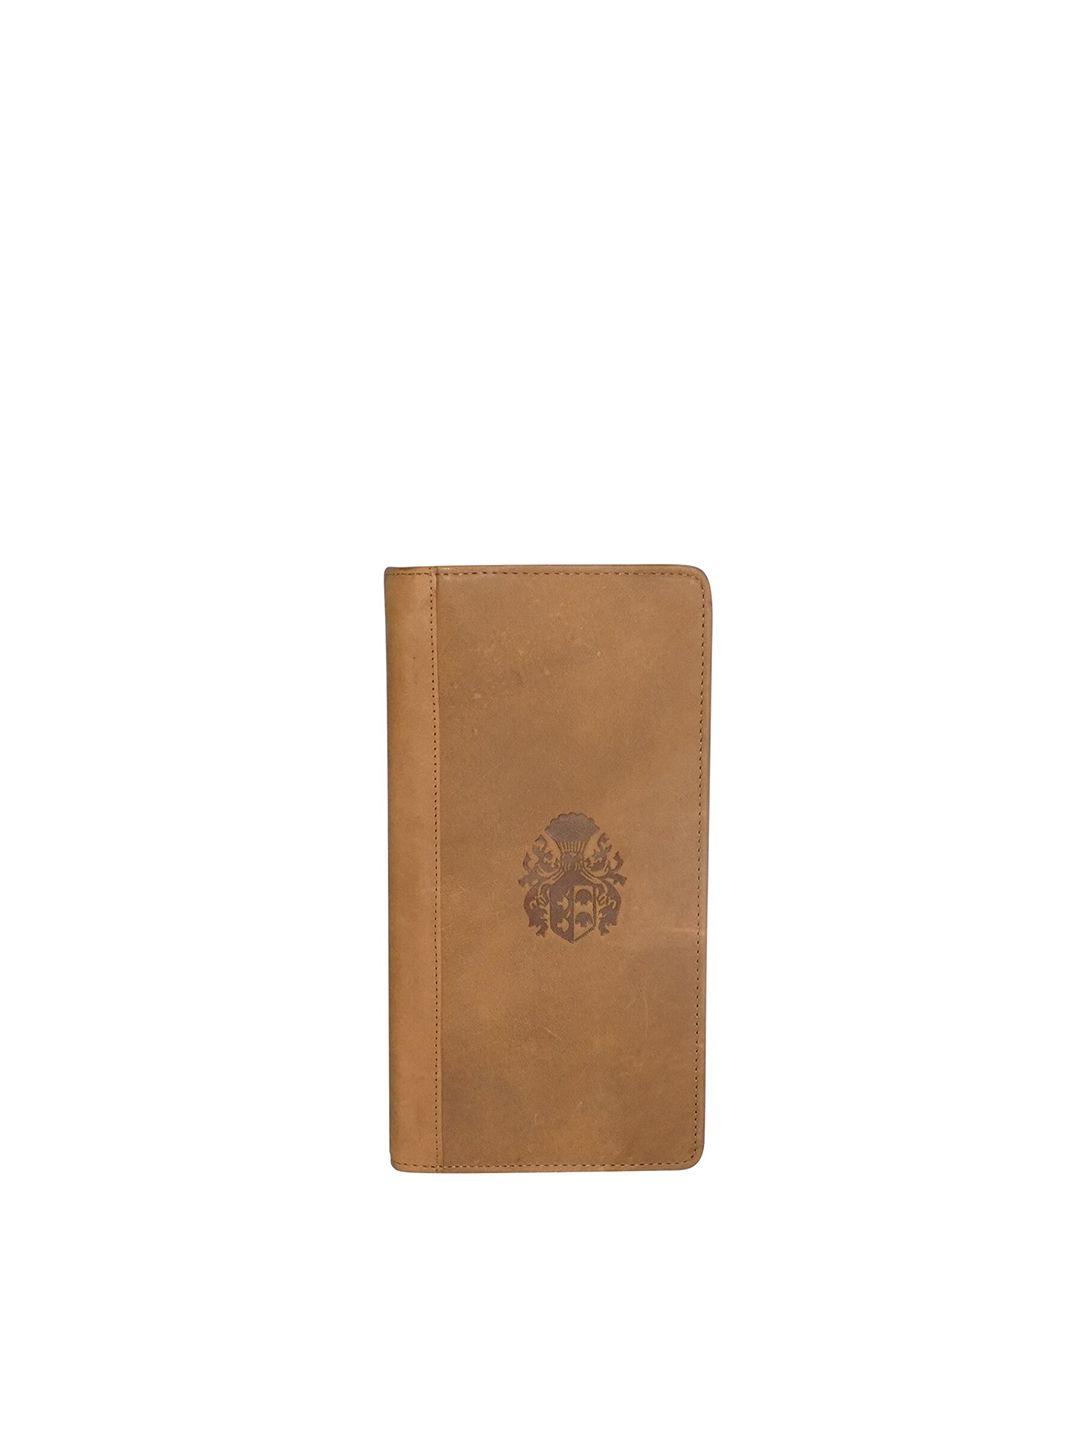 style shoes unisex tan leather passport holder